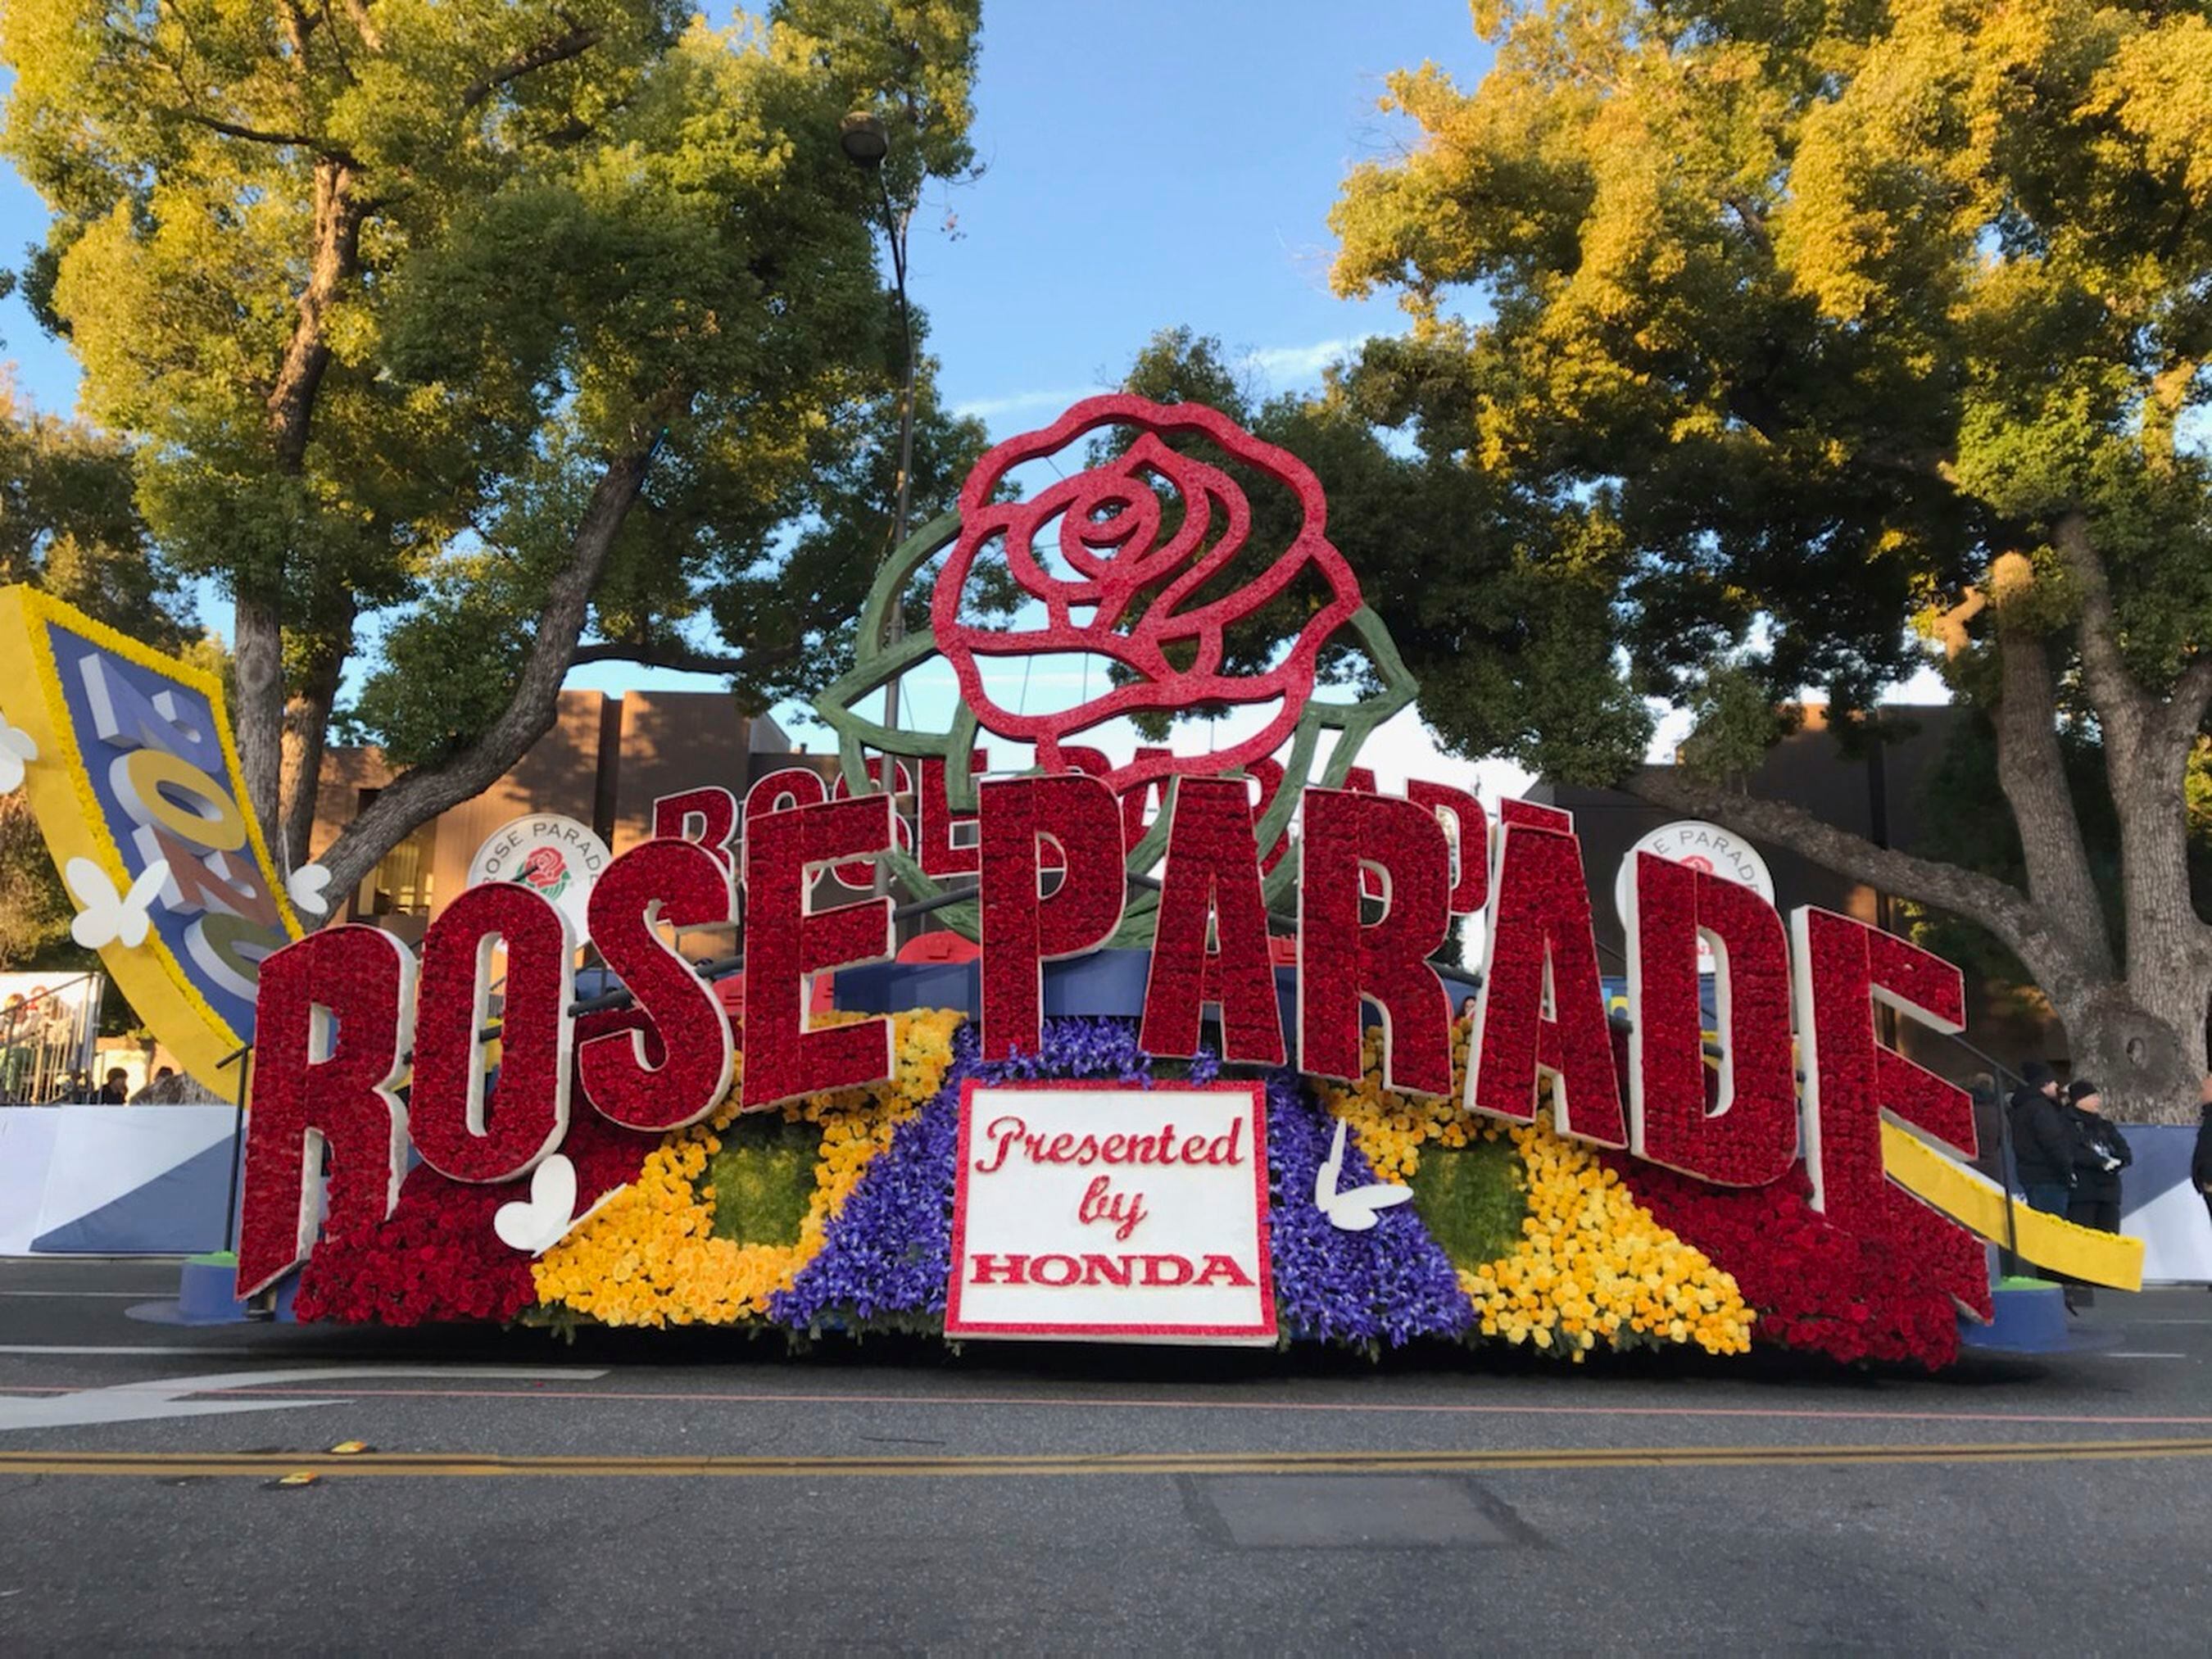 New Year’s Rose Parade to proceed despite COVID-19 surge